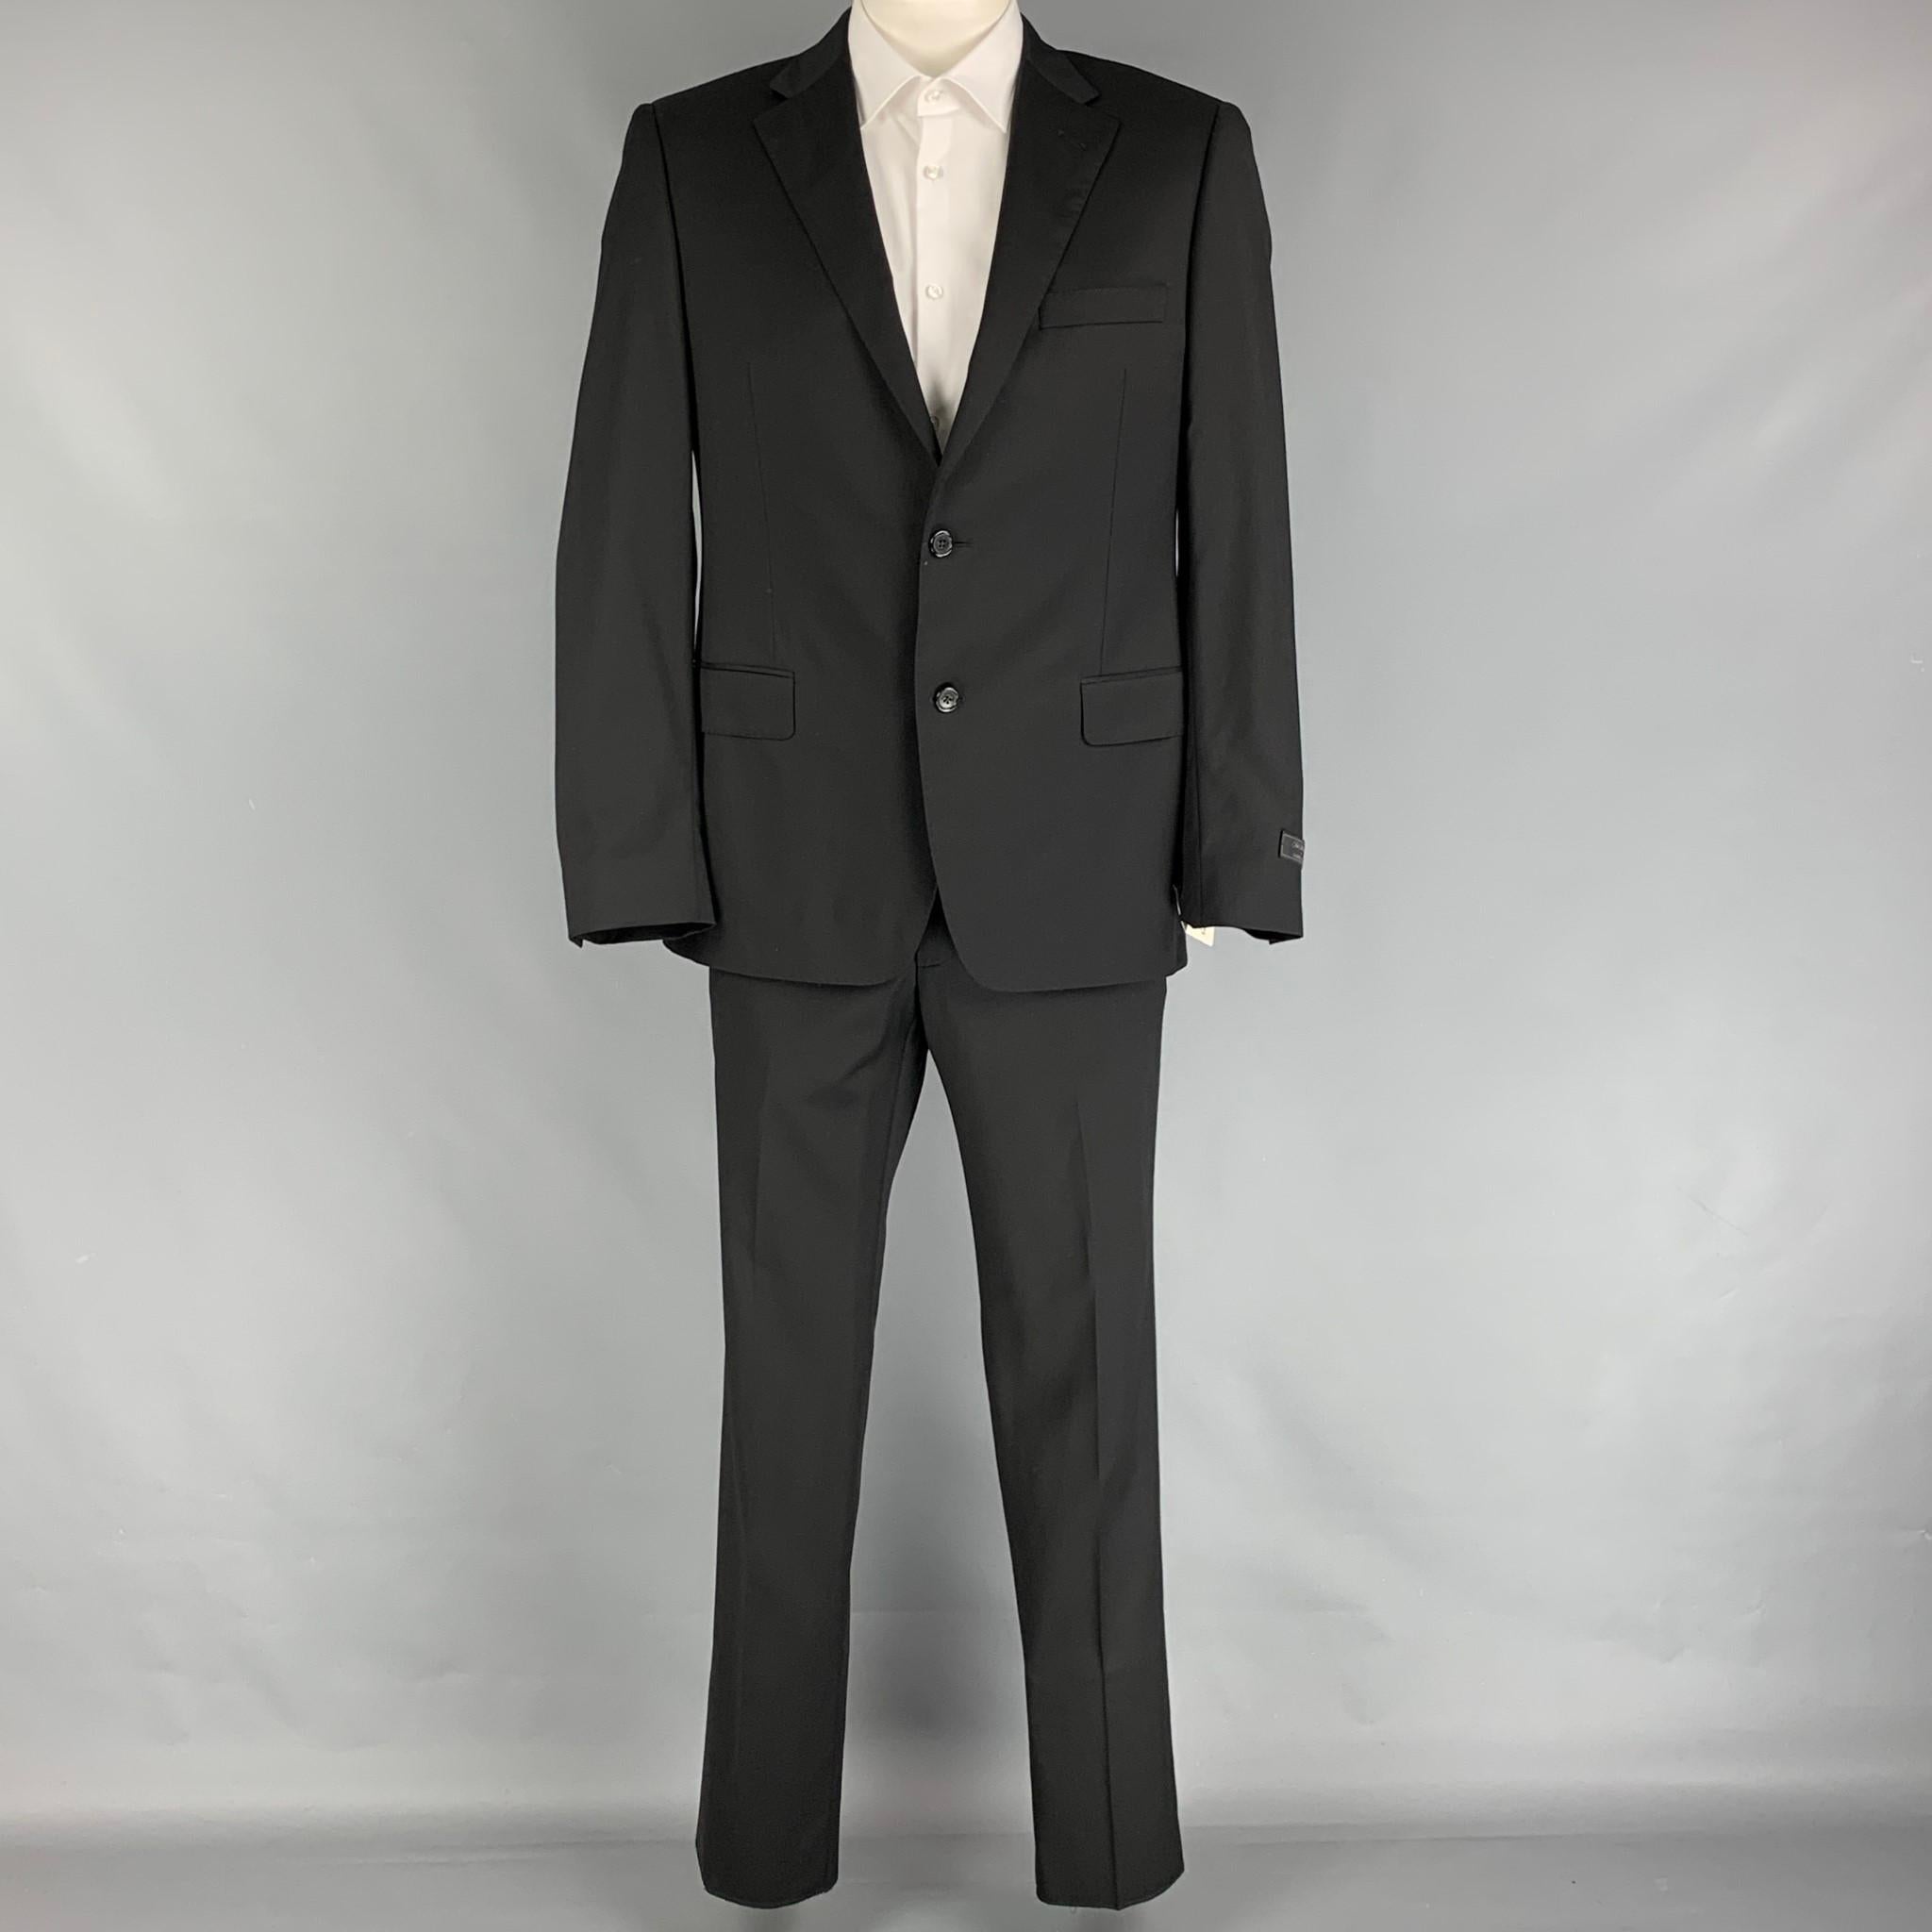 SAKS FIFTH AVENUE by SAMUELSOHN suit comes in black wool with a full liner and includes a single breasted, double button sport coat with a notch lapel and matching flat front trousers.

New With Tags.
Marked: 42-36